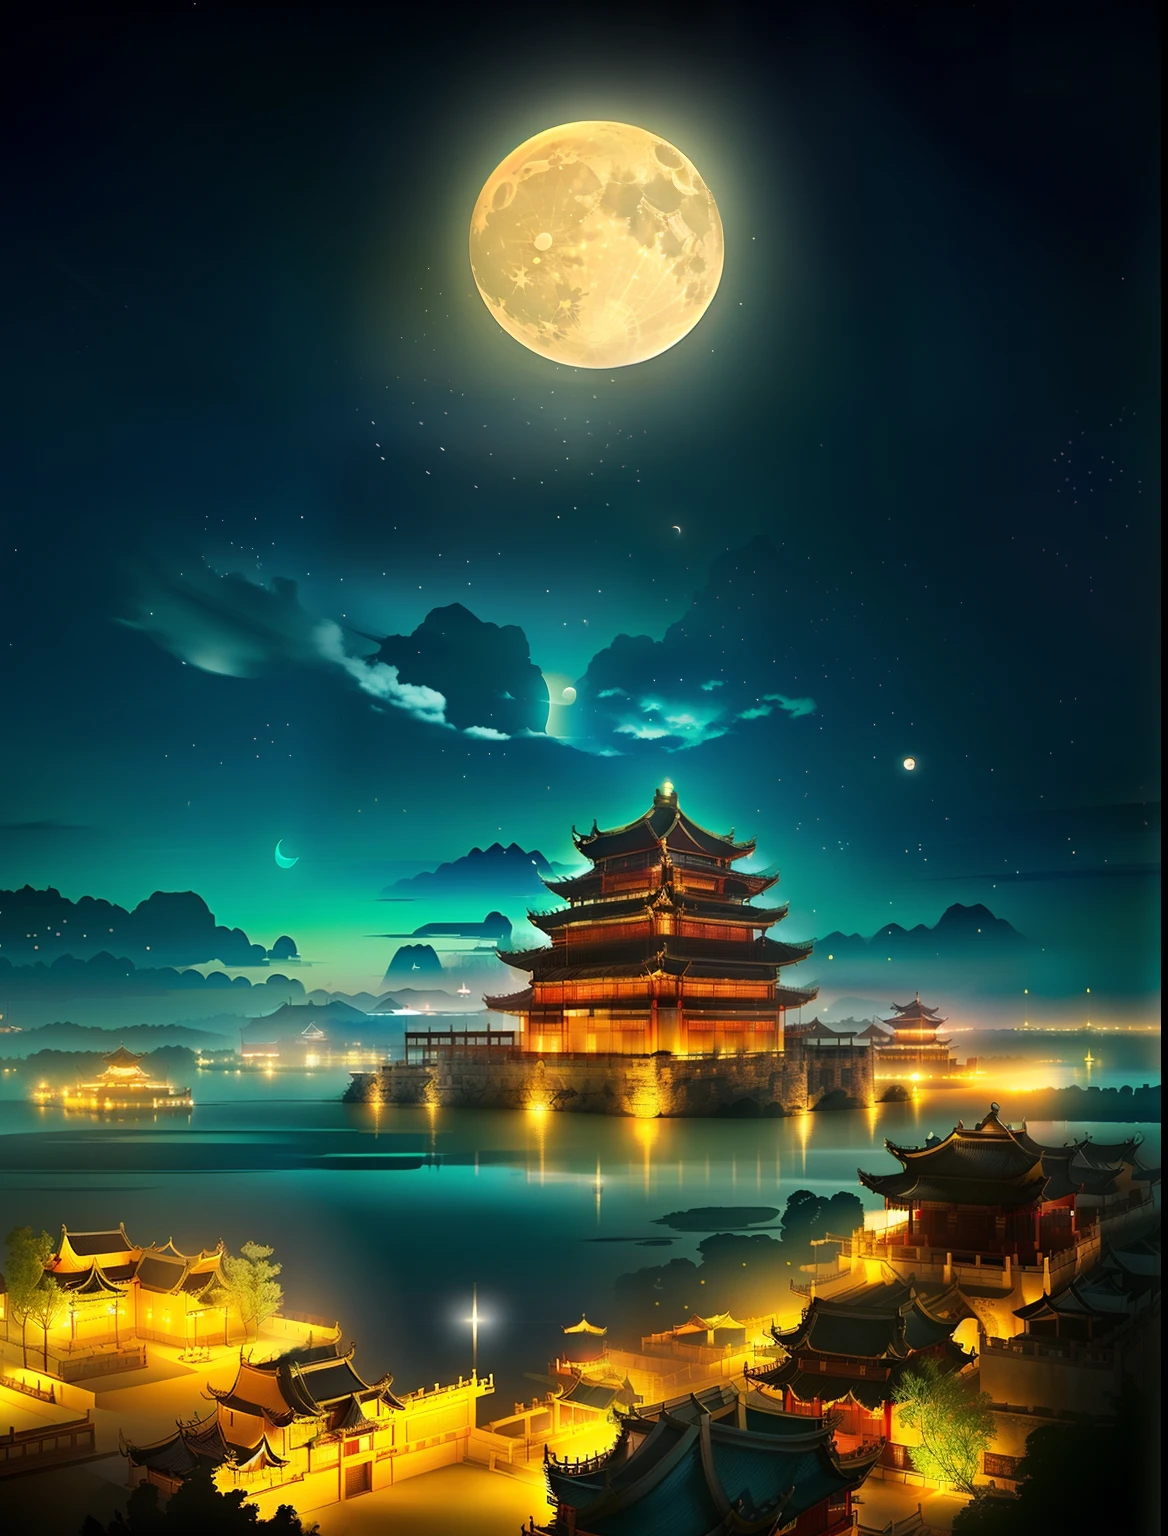 A big building，Situated on the top of the lake under a full moon, Beautiful rendering of the Tang Dynasty, cyberpunk chinese ancient castle, author：Juda, Chinese fantasy, dreamy Chinese towns, by Yang J, Chinese style, painted tower of the moon, float under moon light at night, amazing wallpapers, nighttime scene, dreamland of chinese, the glow of the moonlight